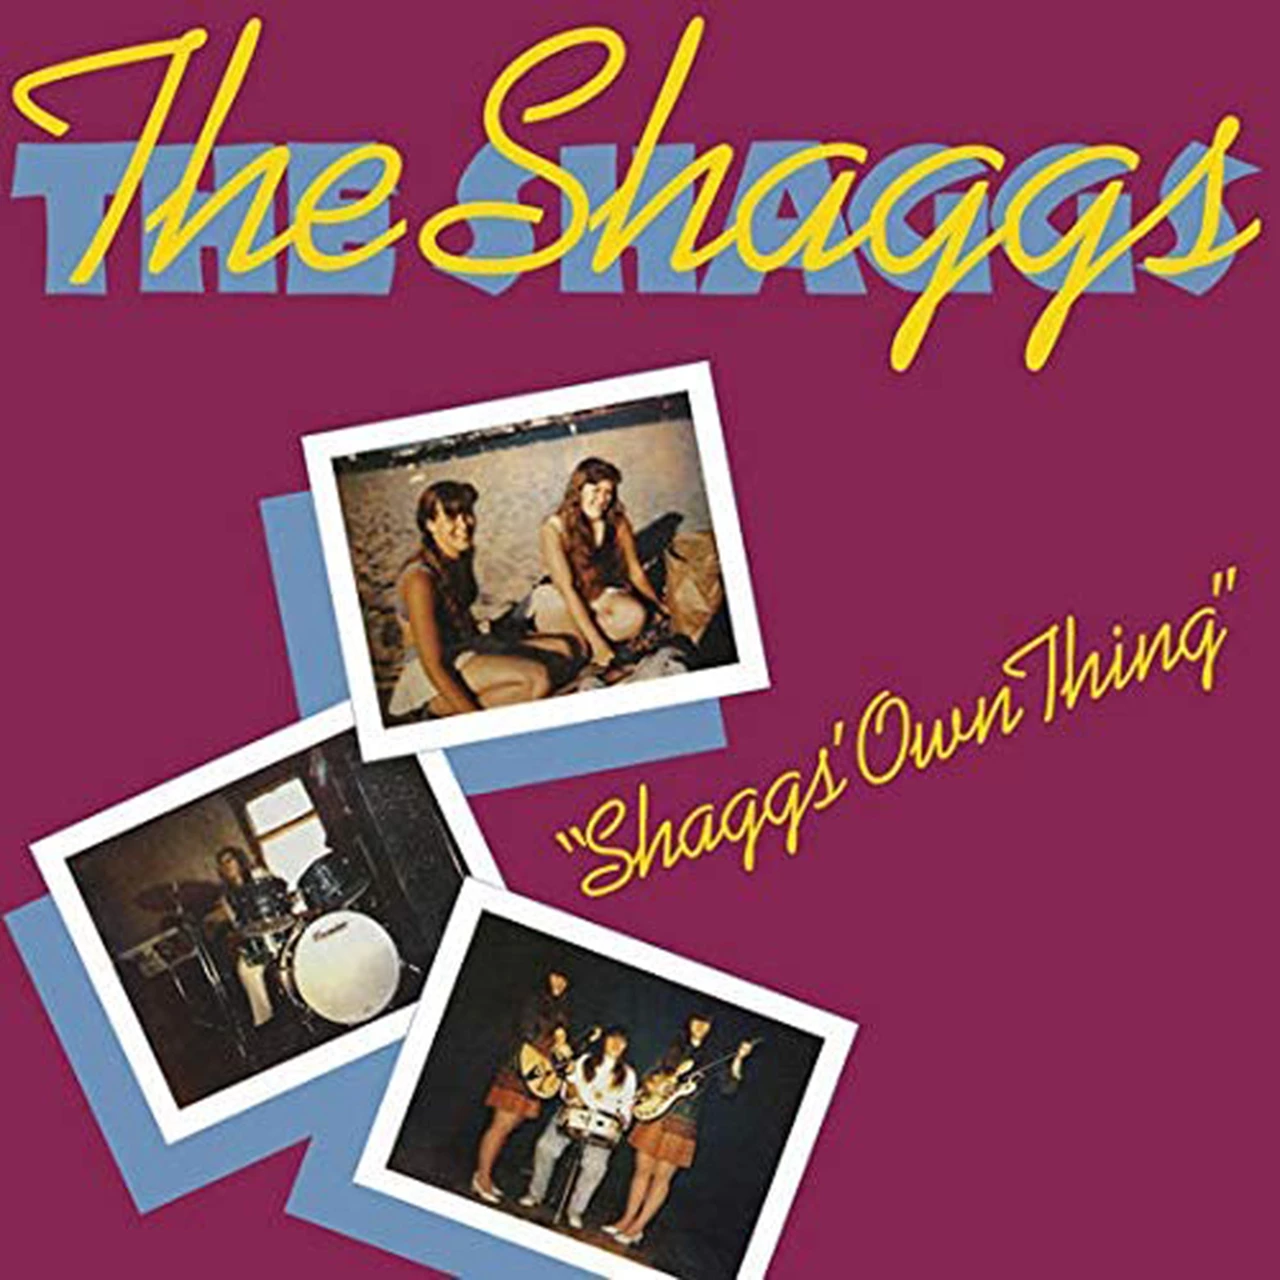 Shaggs Own Thing by The Shaggs